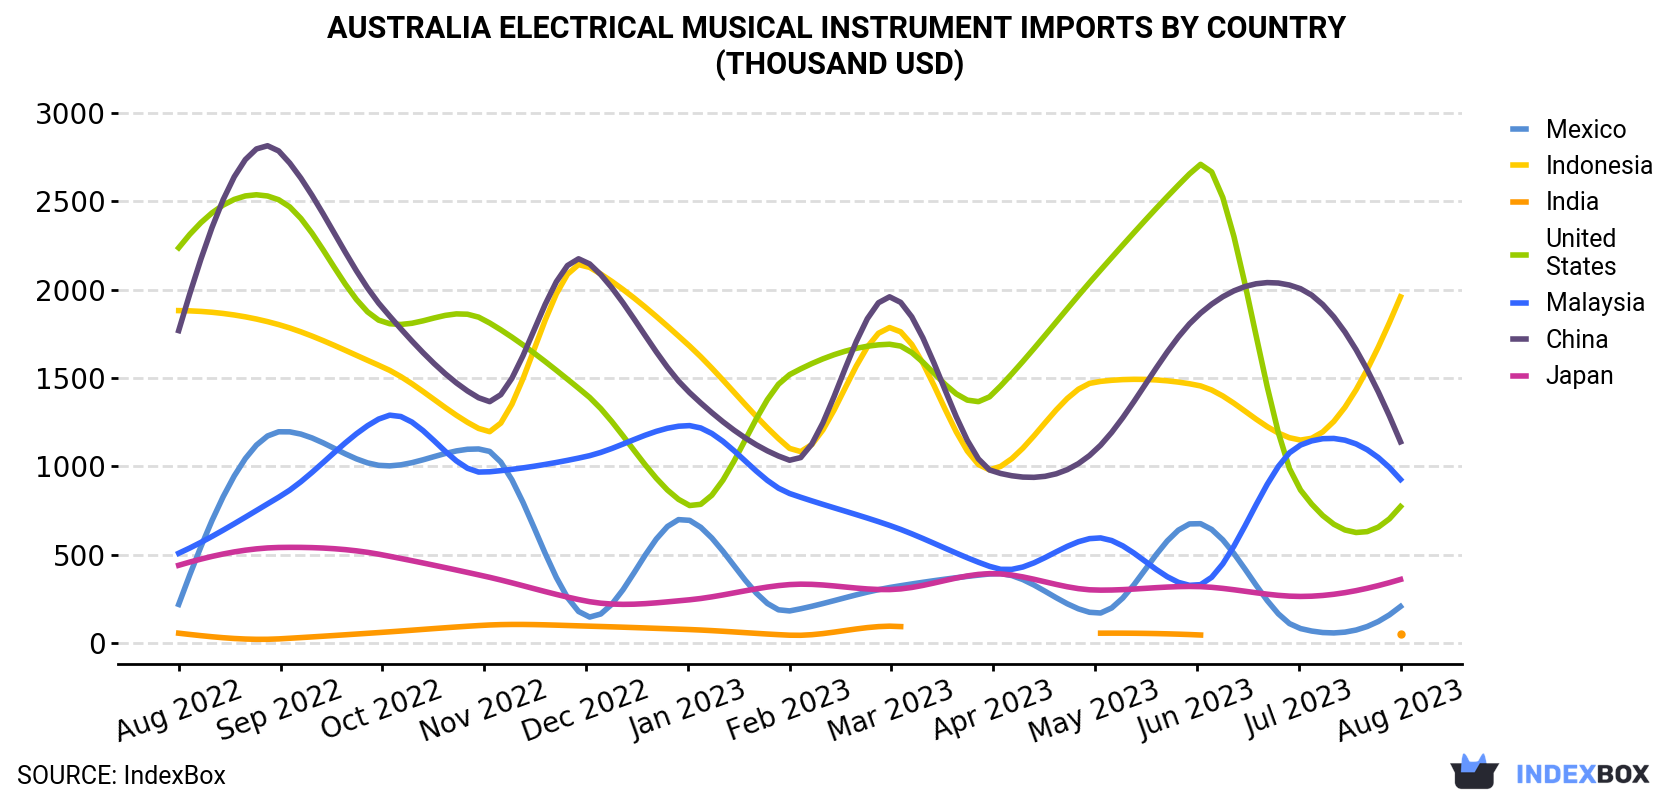 Australia Electrical Musical Instrument Imports By Country (Thousand USD)